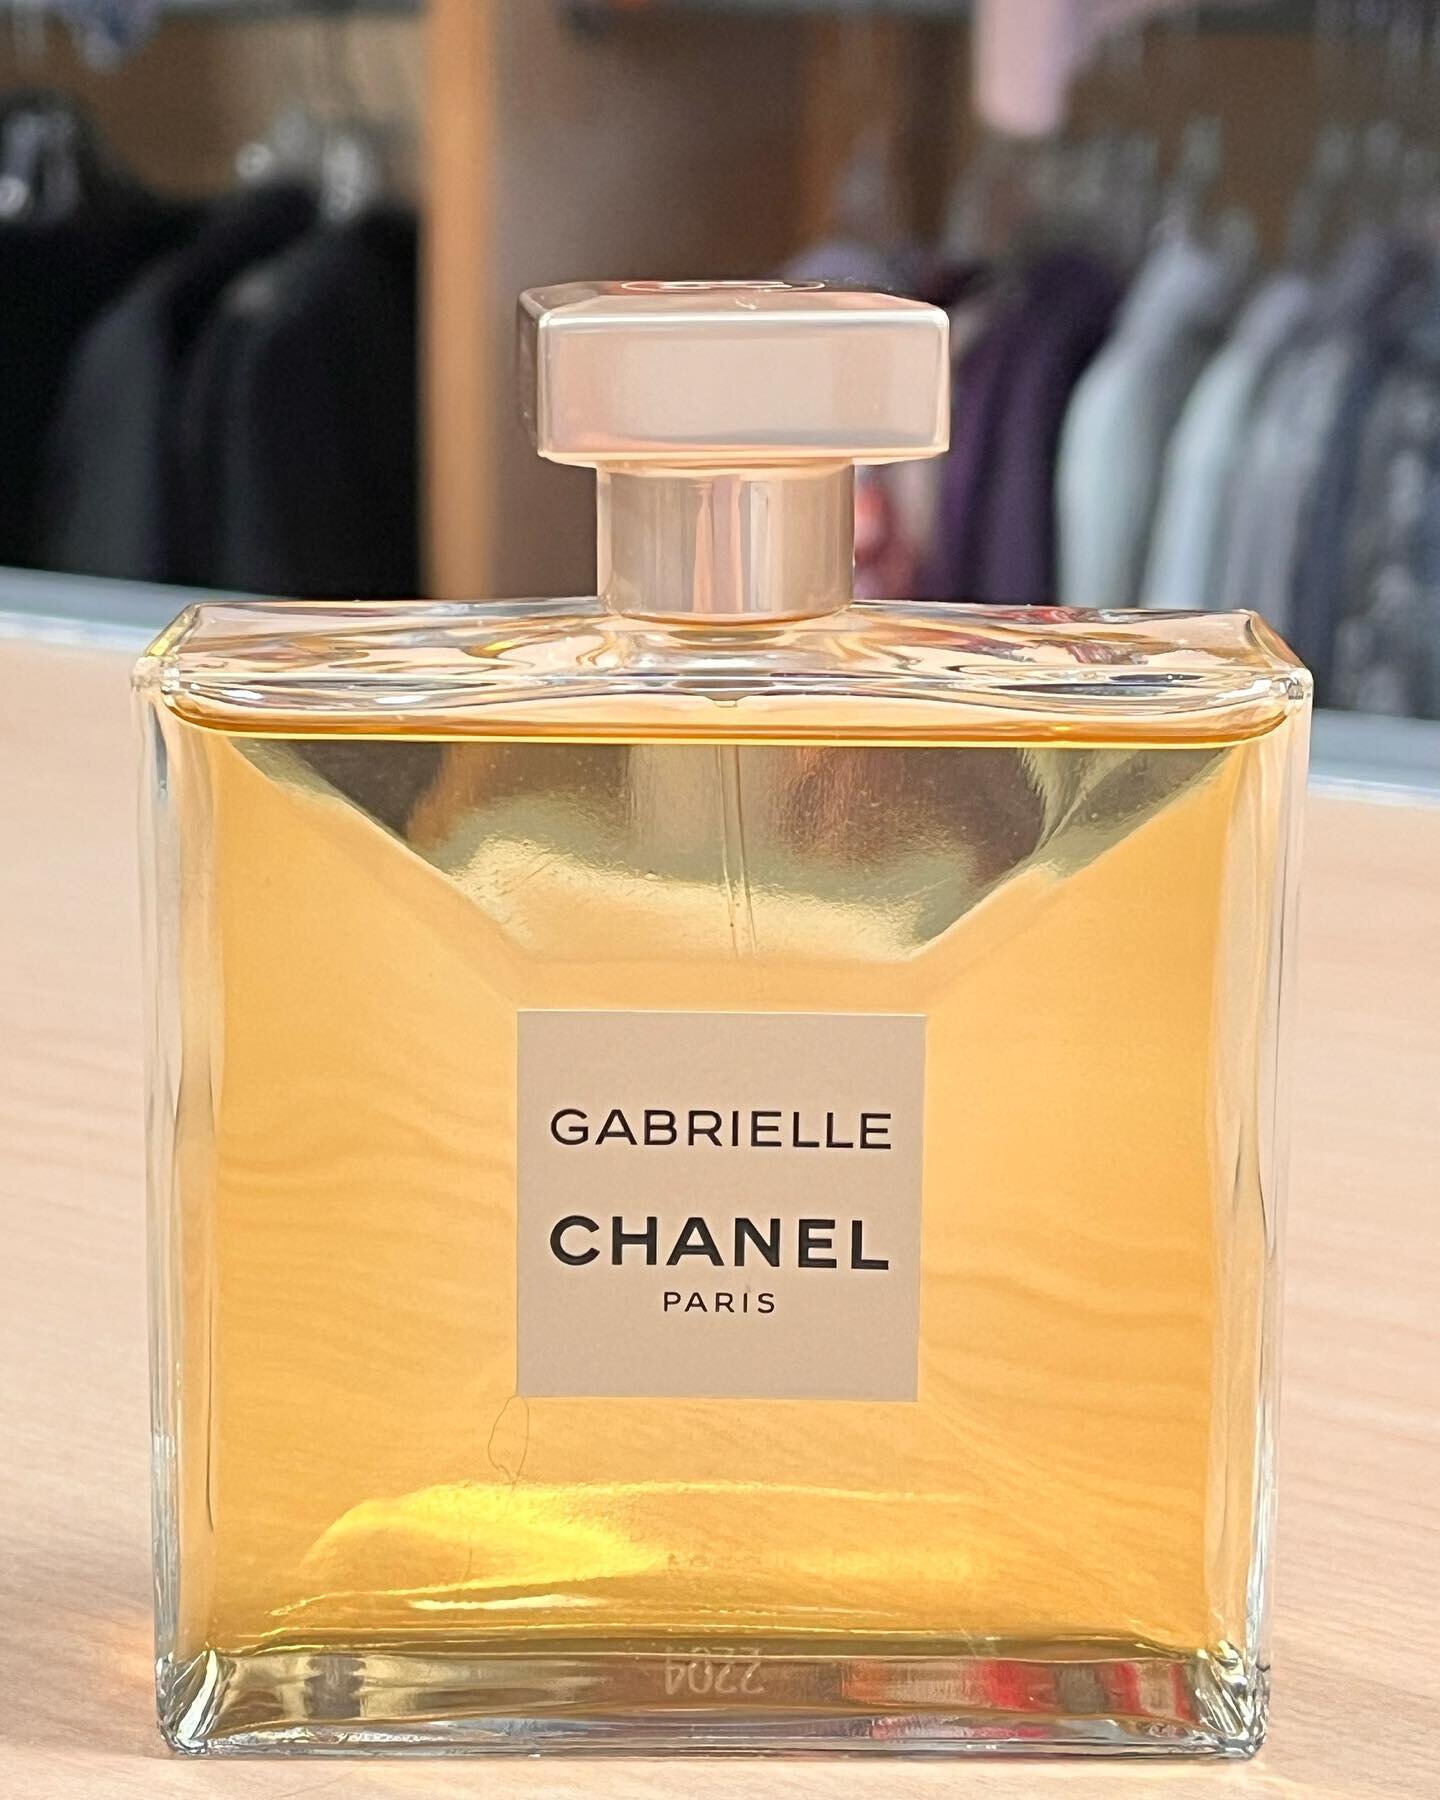 Doing a public service if this is your favorite 🤩 3.4 oz Chanel Gabrielle Eau de Parfum. Orig retail is $160 and we have it for just $69 😯 Smells ahhhmaazzing!
.
.
#uptownattic #designerconsignment #chanel #eaudeparfum  #hudsonvalley #gardinerny #w